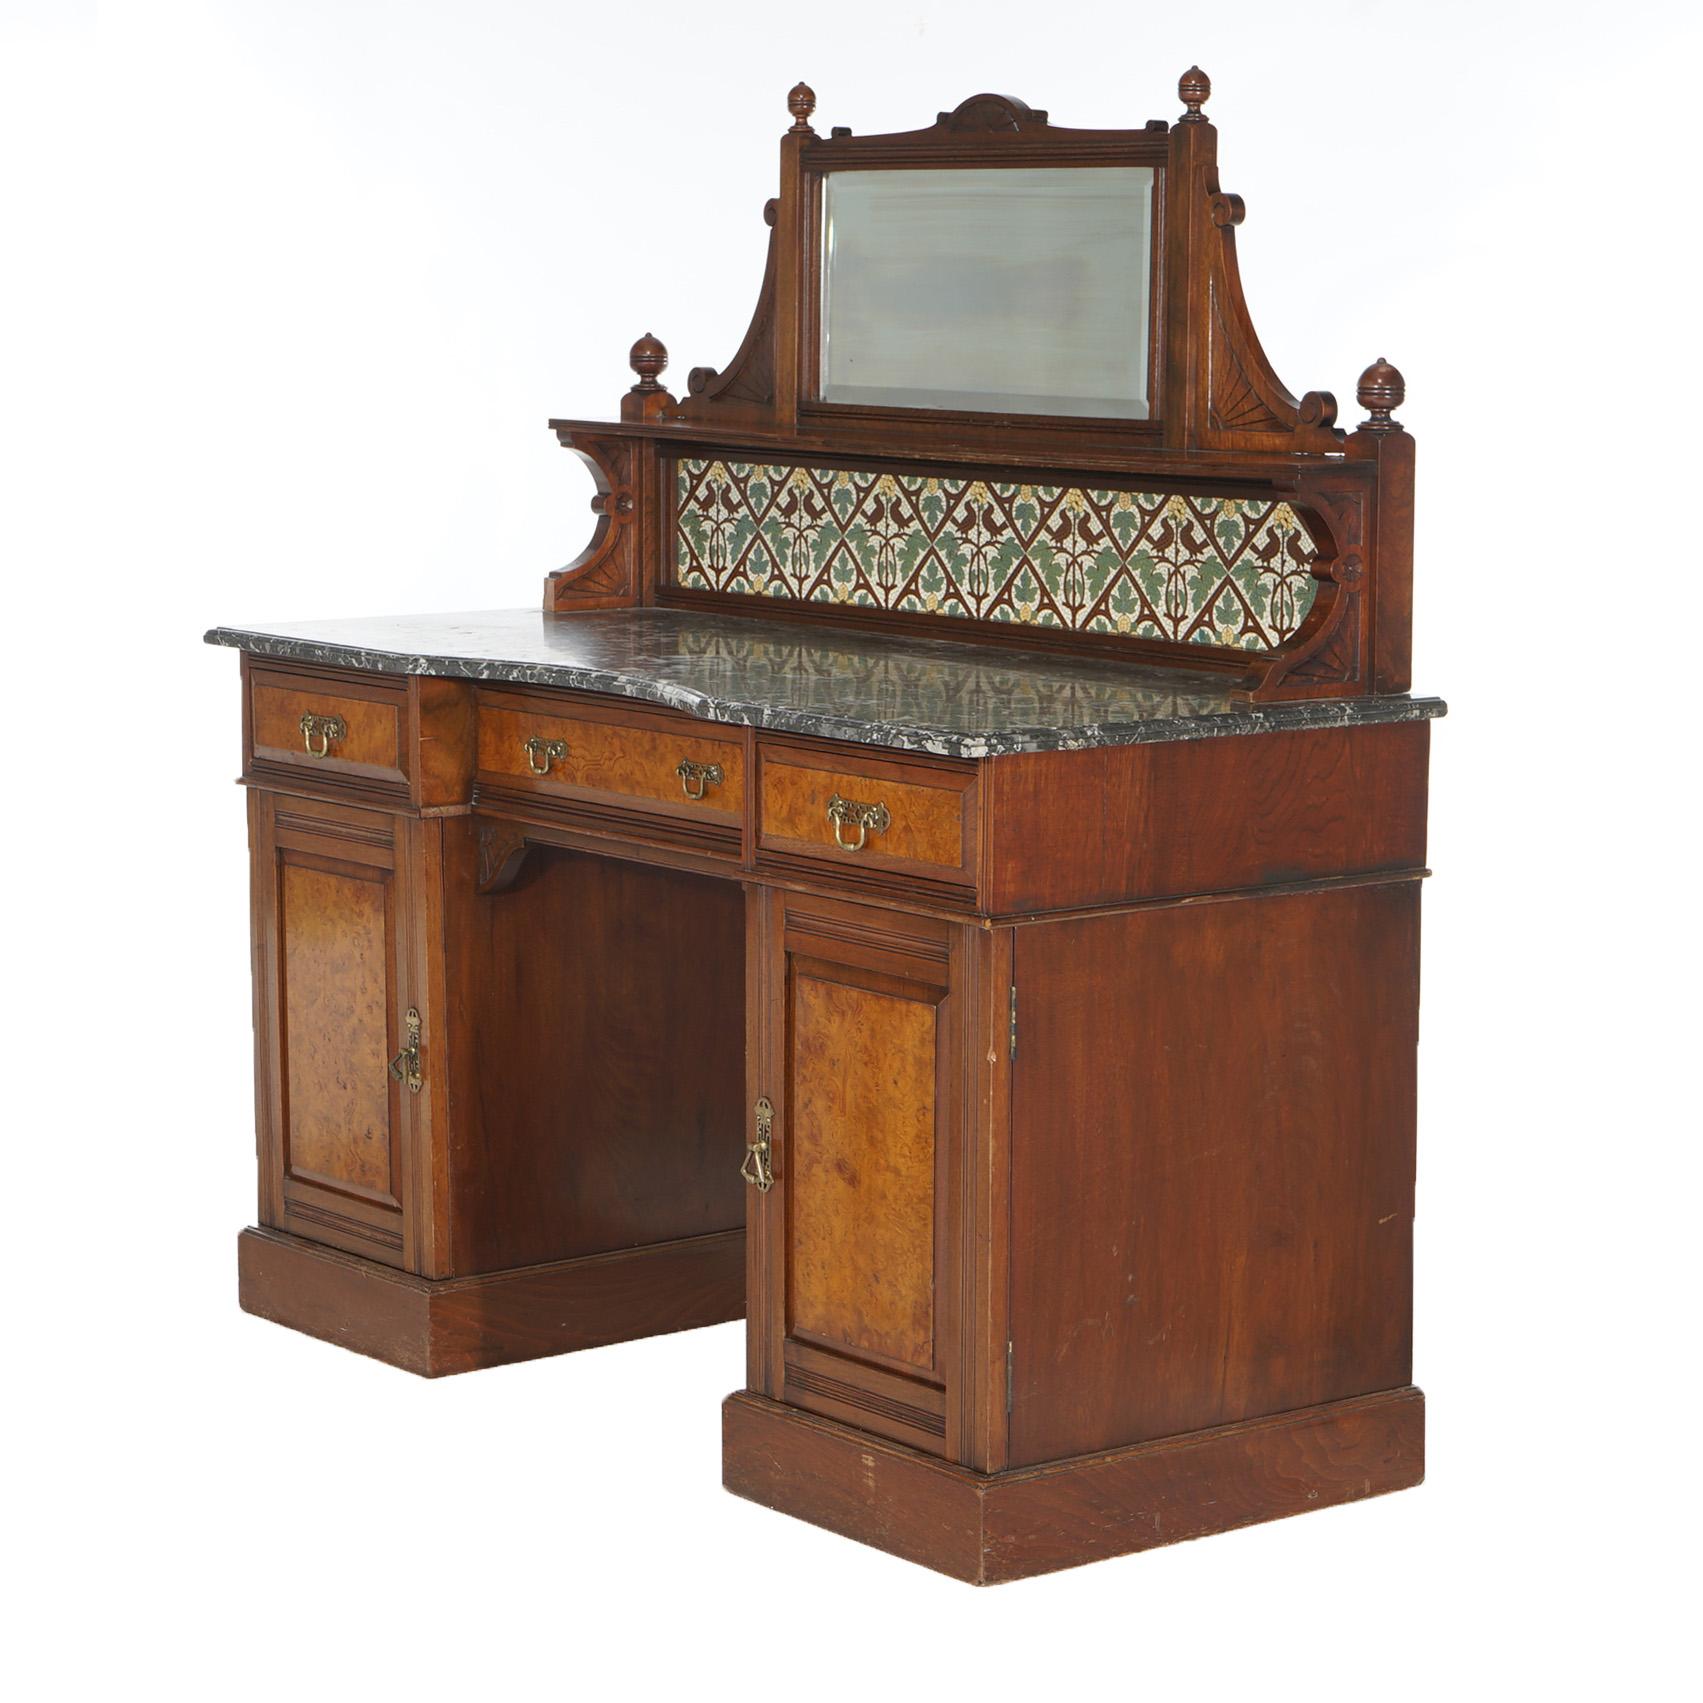 19th Century Antique Aesthetic Walnut & Burl Marble Top Dressing Table with Bird & Leaf Tiles